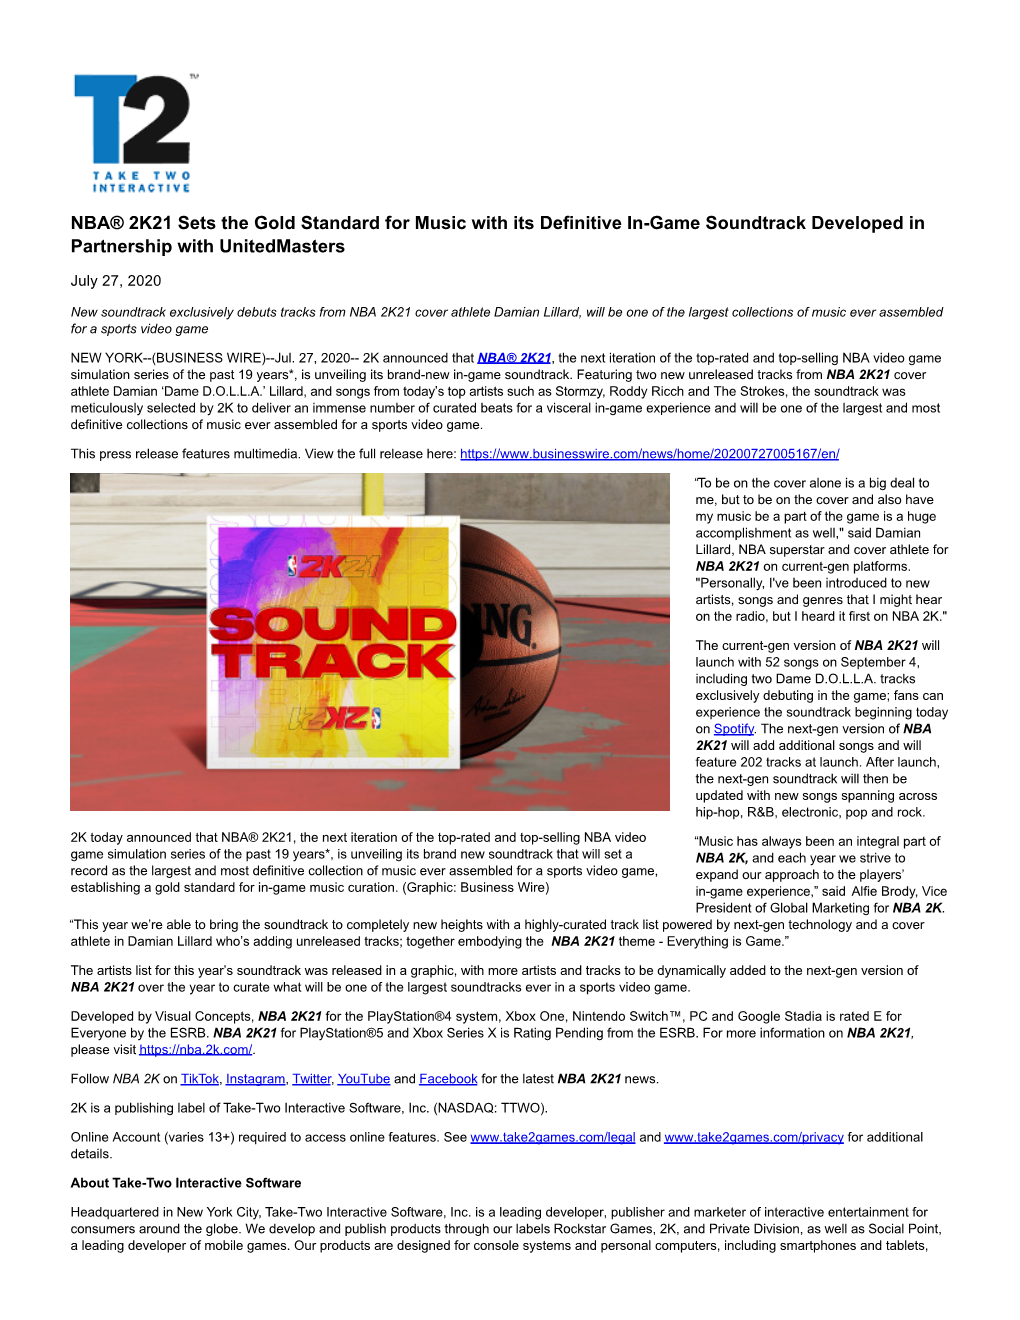 NBA® 2K21 Sets the Gold Standard for Music with Its Definitive In-Game Soundtrack Developed in Partnership with Unitedmasters